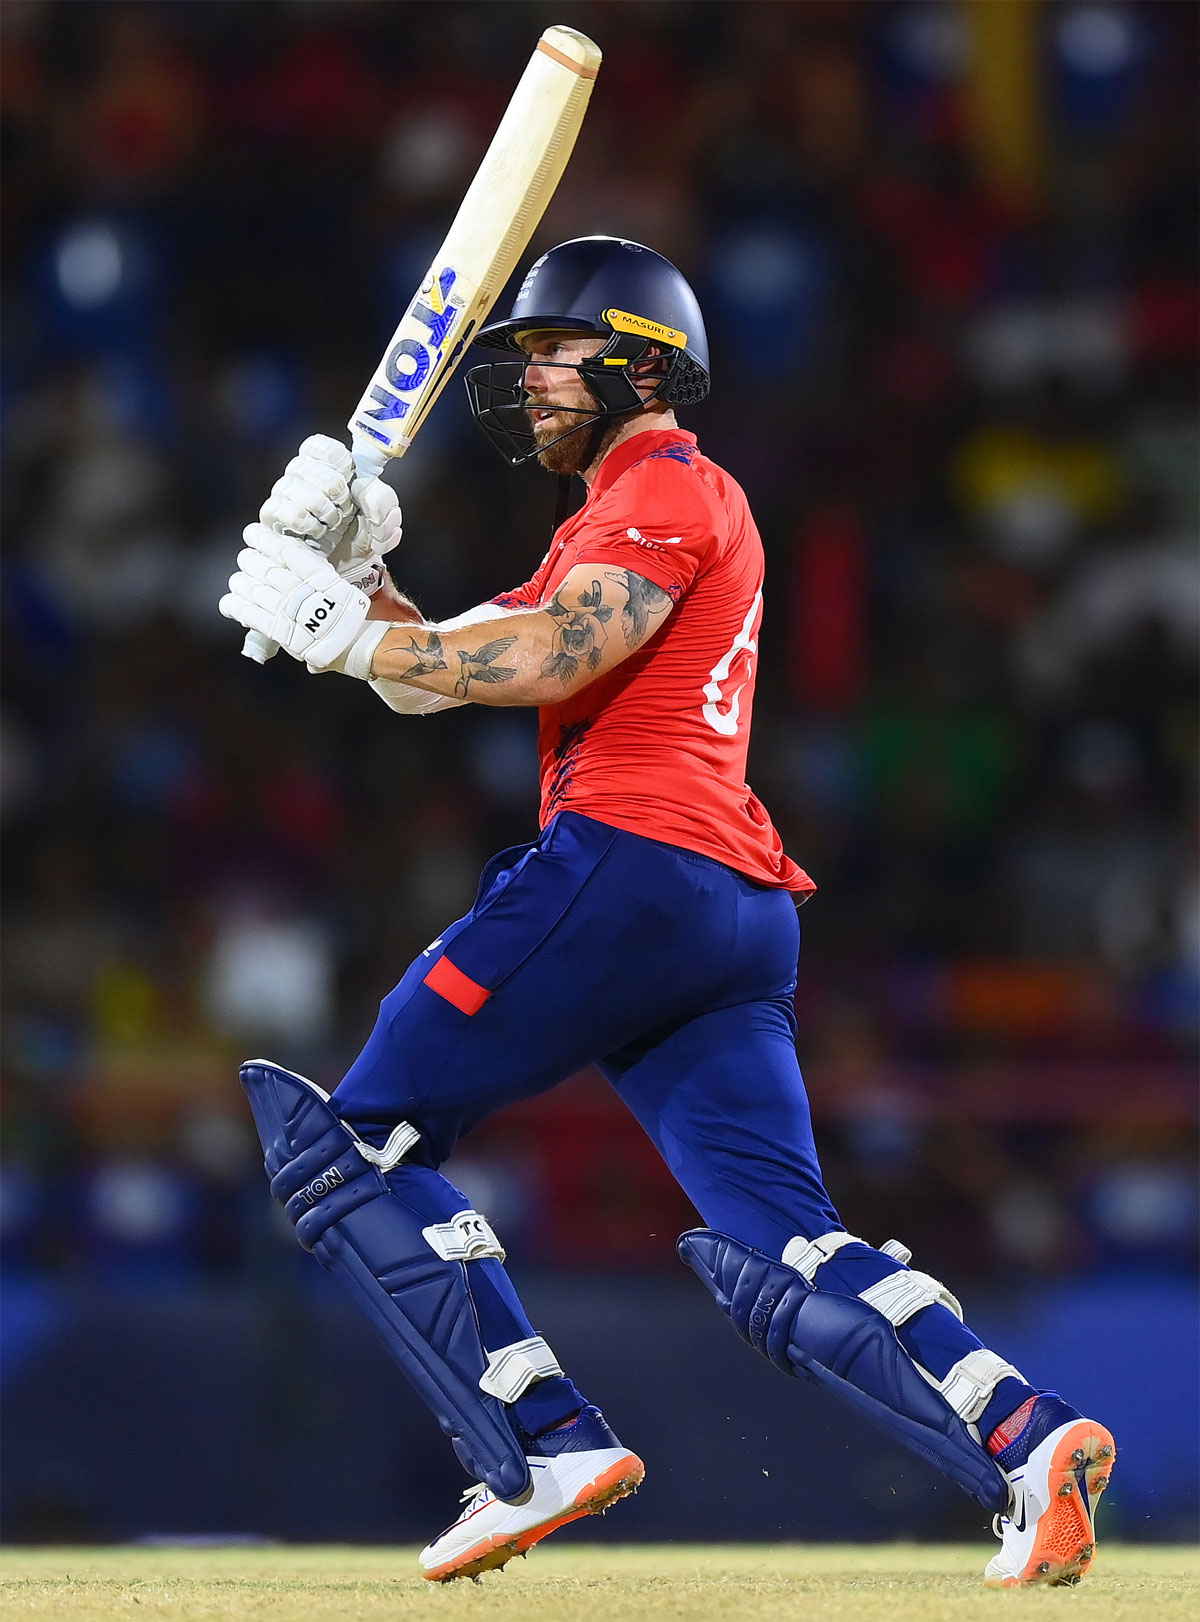 Opener Philip Salt led England's successful chase against the West Indies with an unbeaten 87 in the T20 World Cup Super 8 match in Antigua on Thursday.